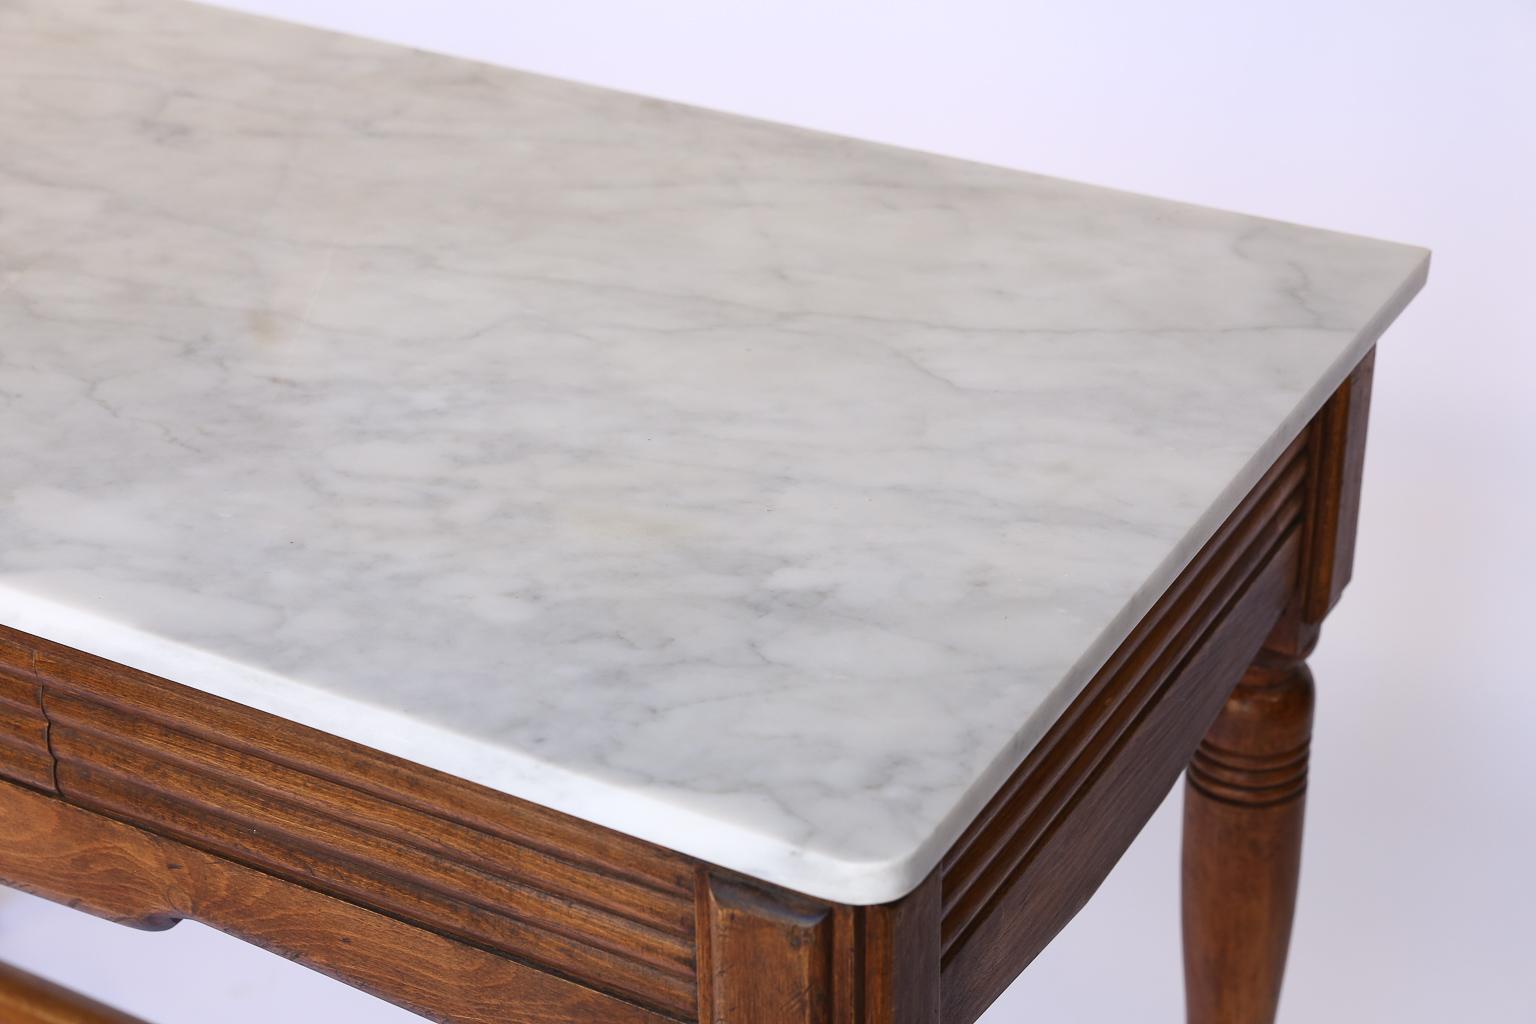 Found in France, this Natta and Nagot butcher table base has been updated with a new marble top. The table features one drawer, with a metal pull, which was originally used to store knives. The metal plate below the drawer reads NATTA & NAGOT. This